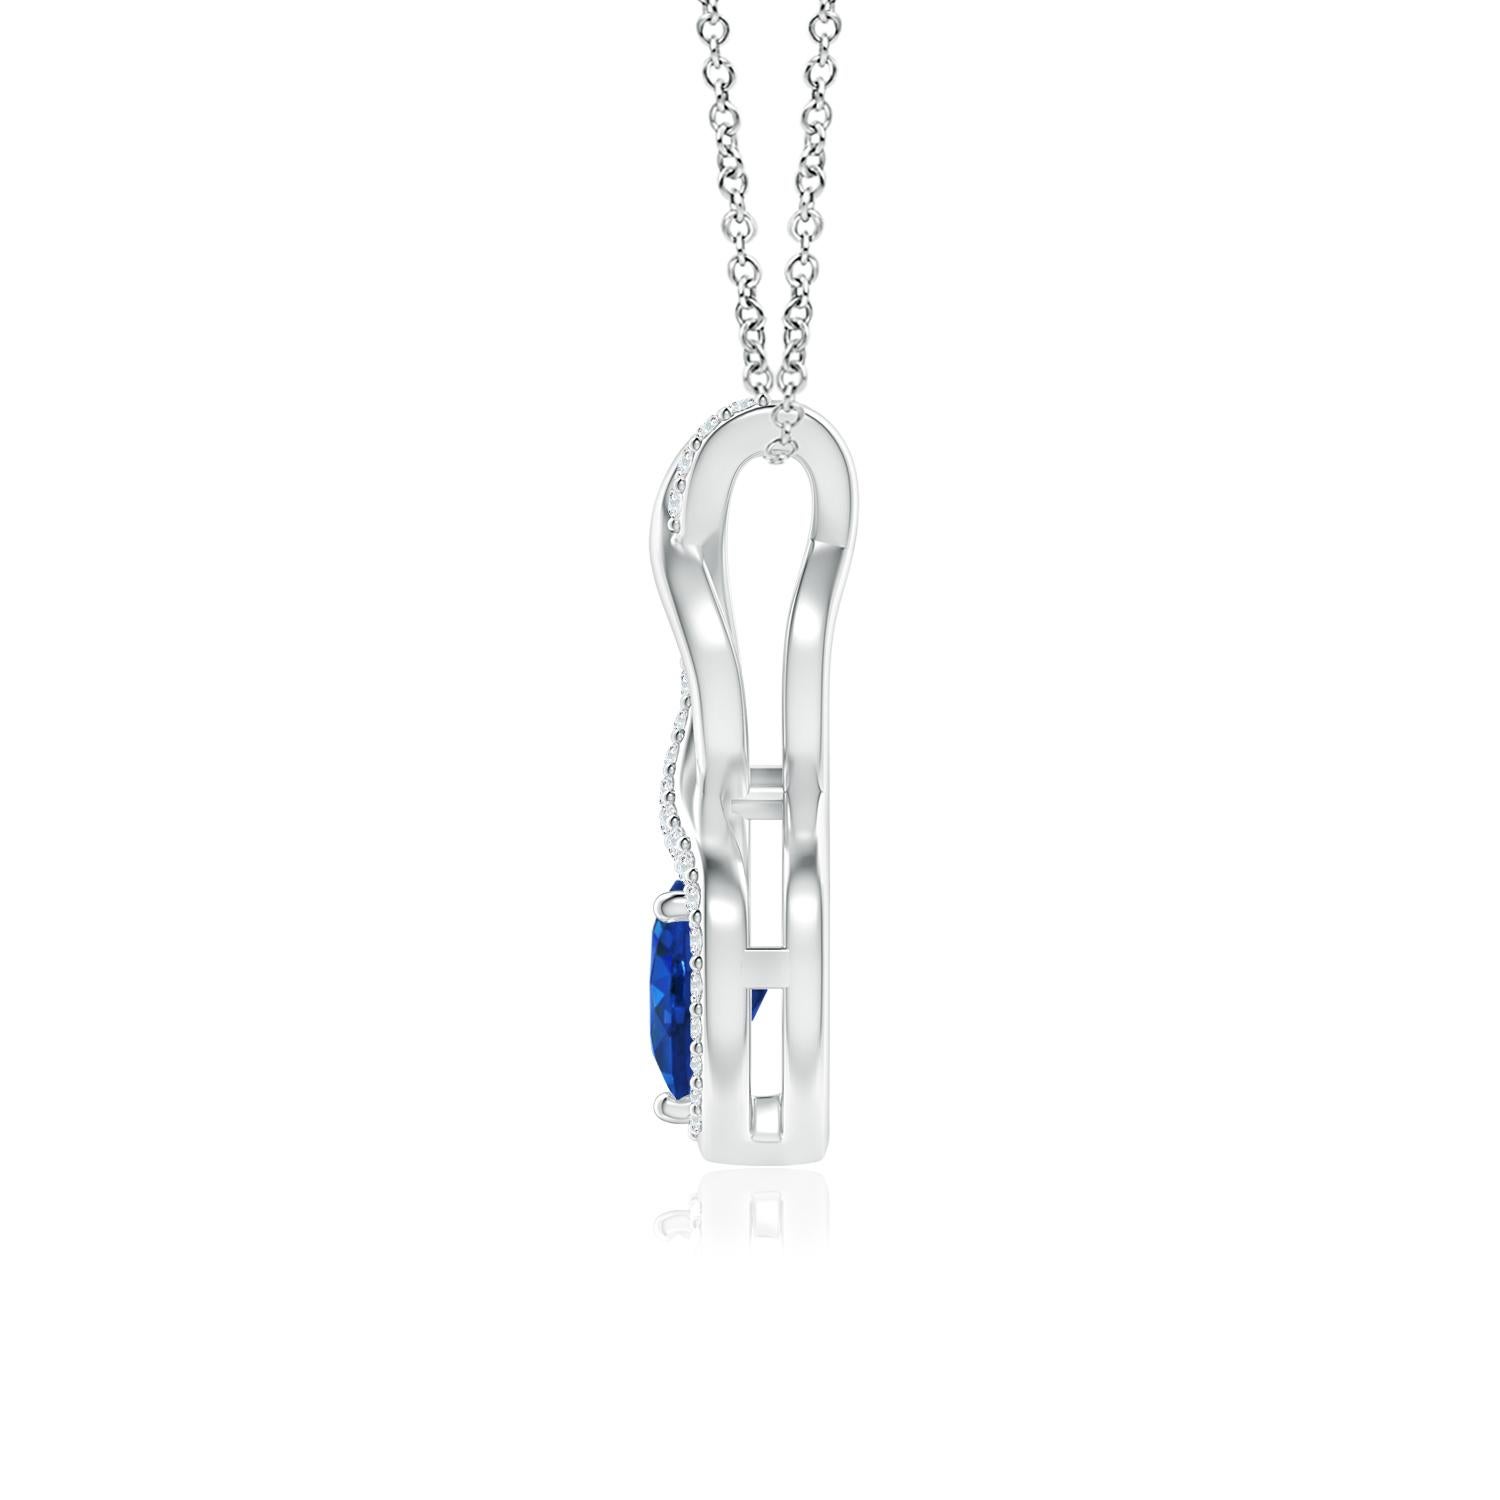 A diamond studded strip entwines with a lustrous metal strip to form an ornate infinity. Floating amid the graceful infinity is a beautiful heart-shaped blue sapphire in a prong setting. The sparkling diamonds infuse a captivating edge to this 14k